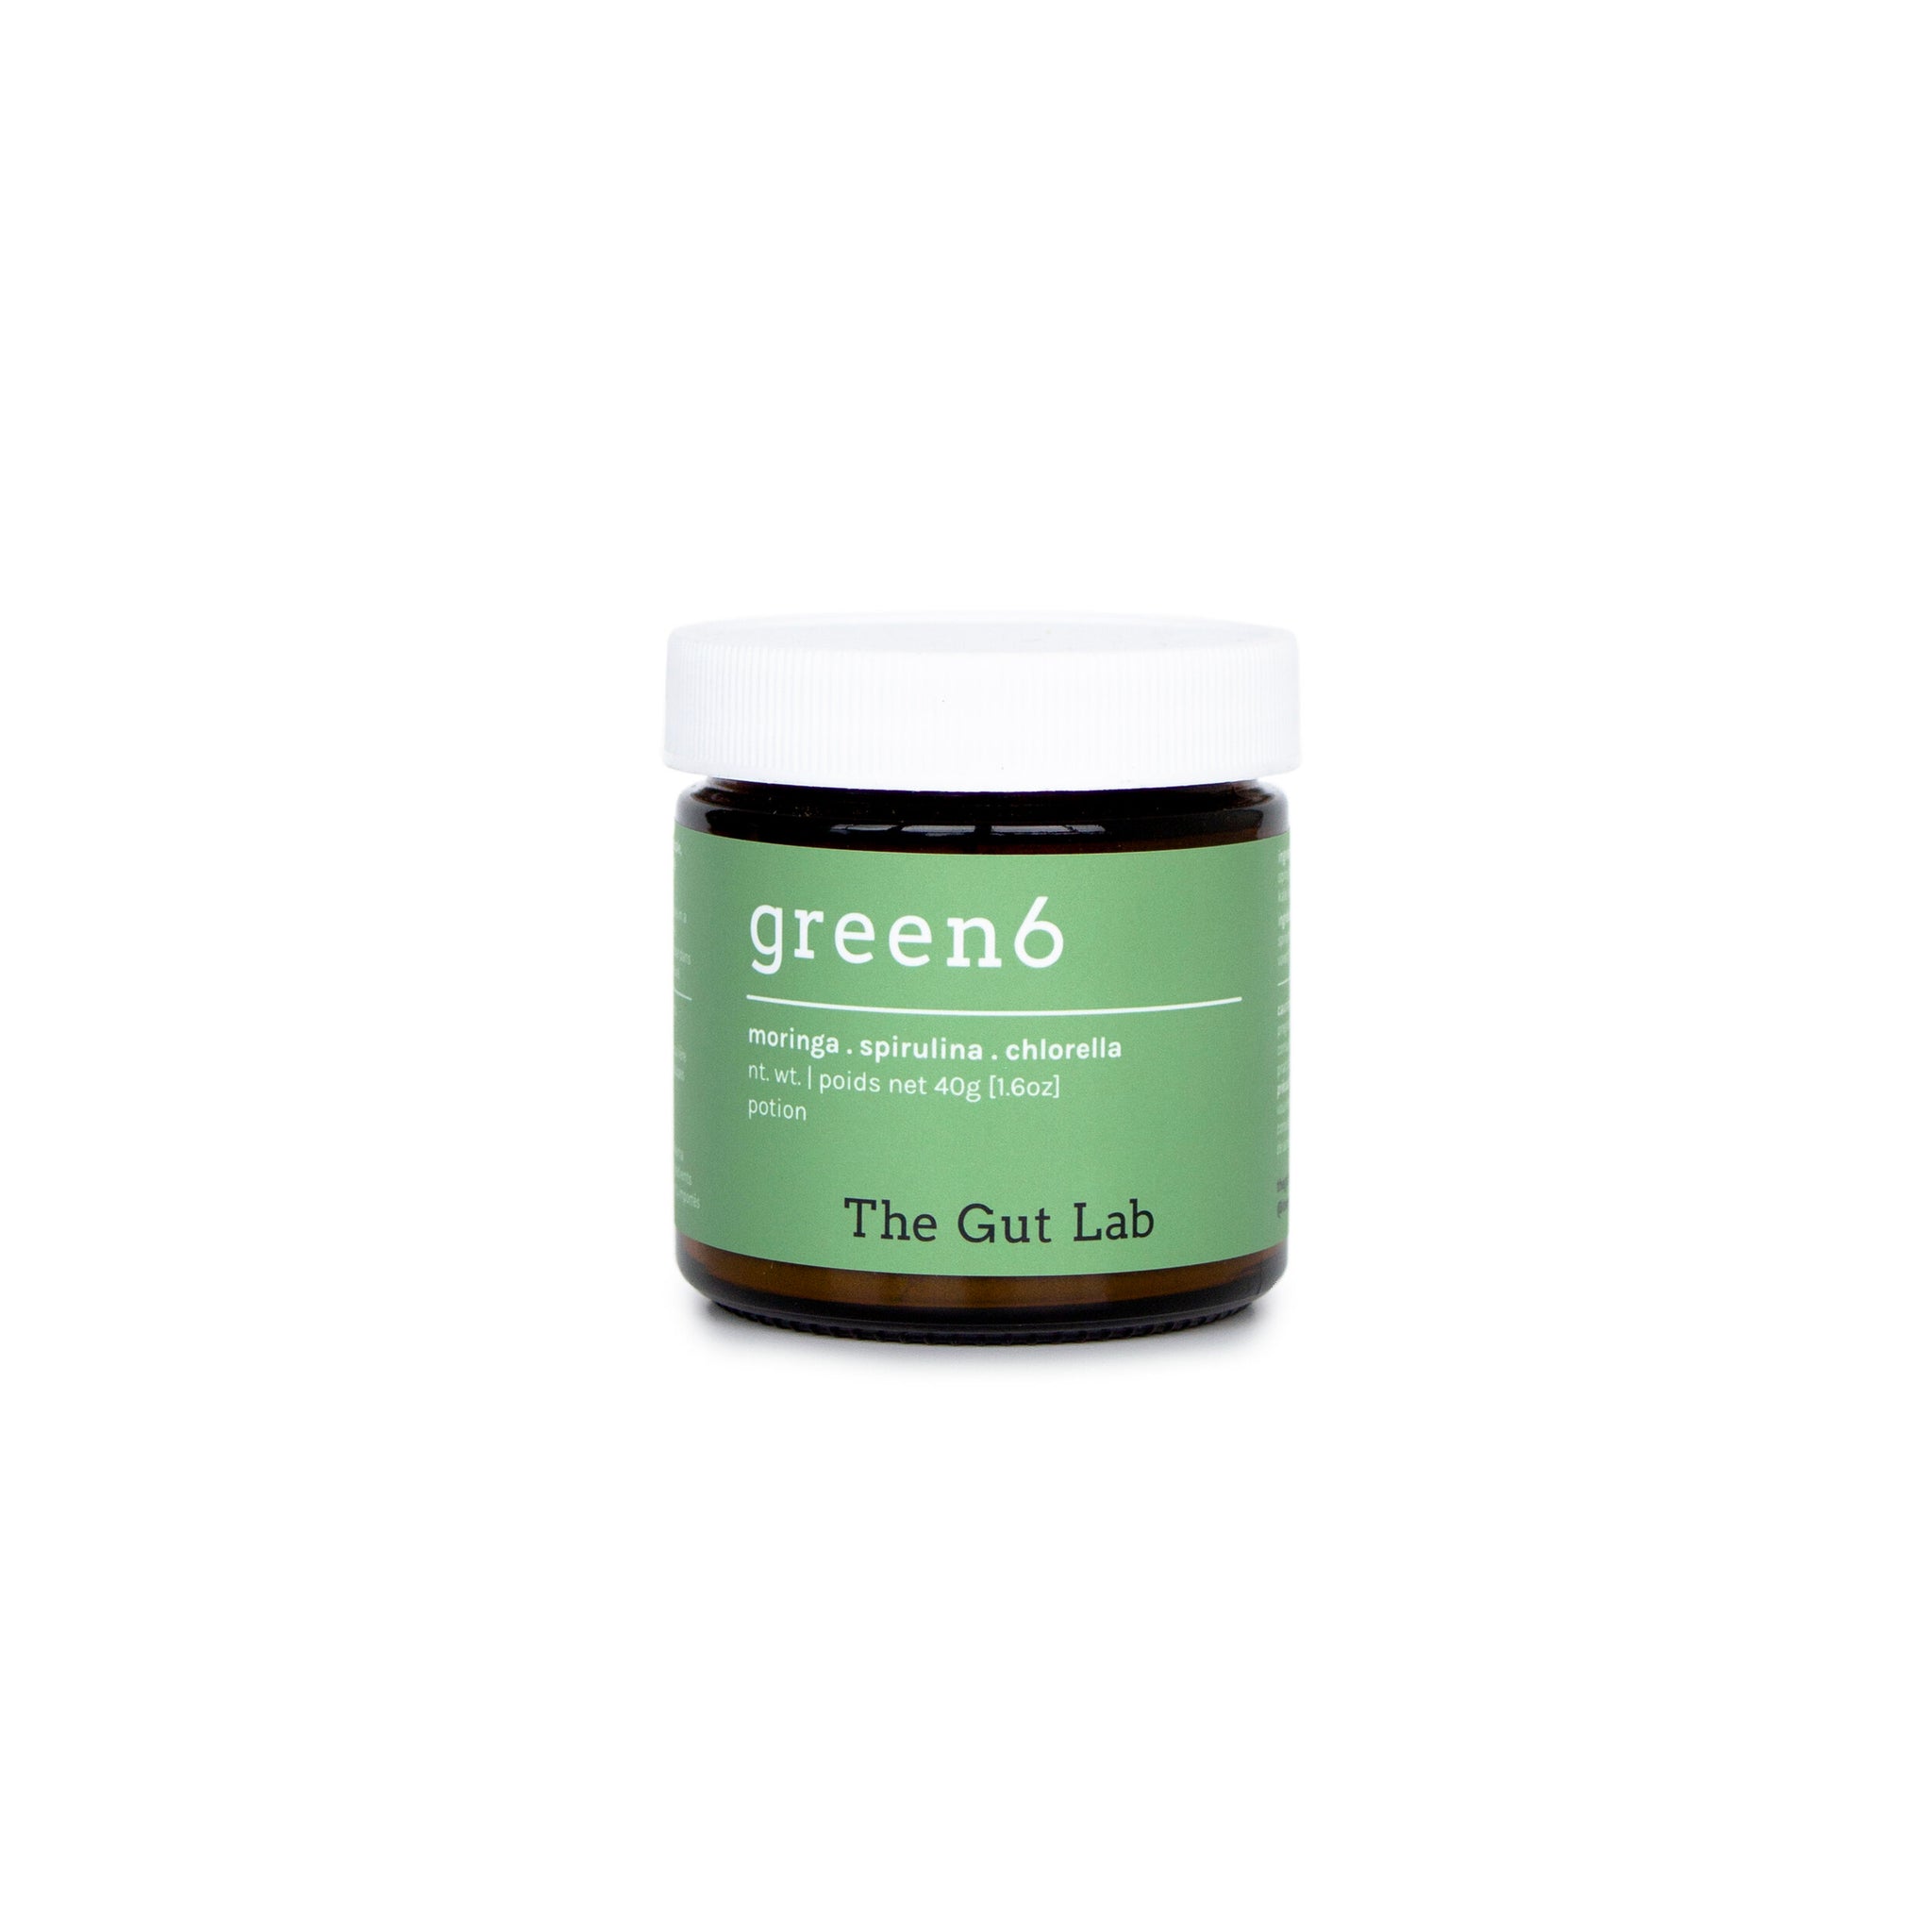 Green6 by The Gut Lab